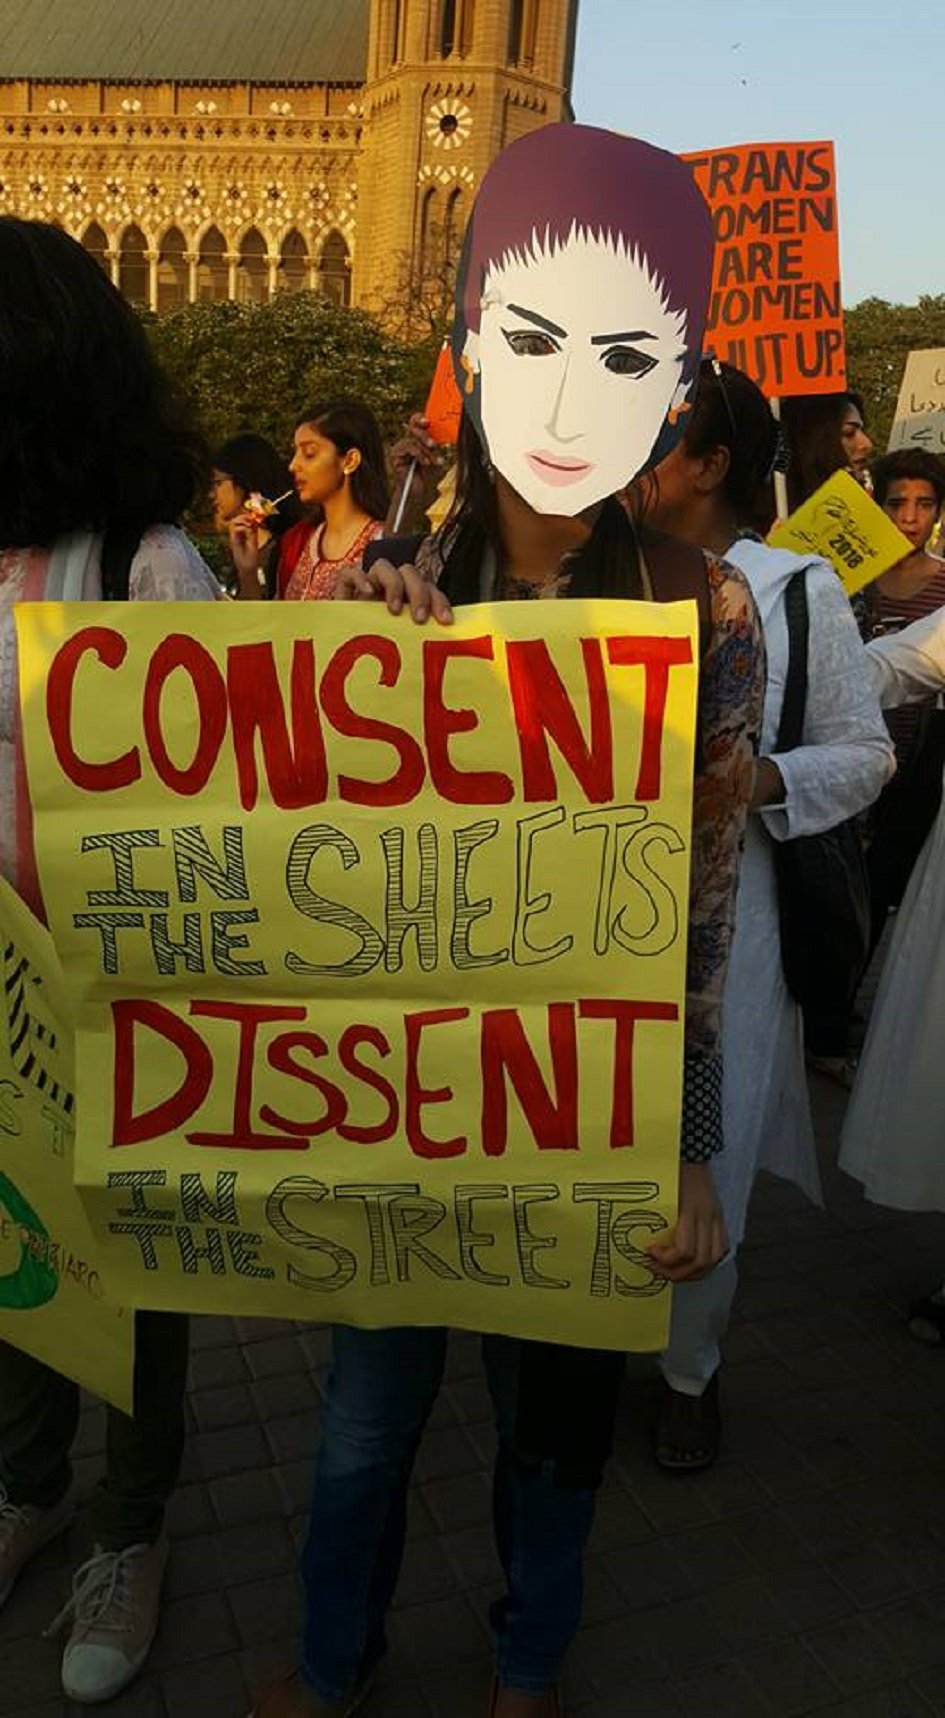 Campaigner wearing a Qandeel Baloch mask calls for consent to be respected and dissent to be nurtured - Photo Courtesy Hija March